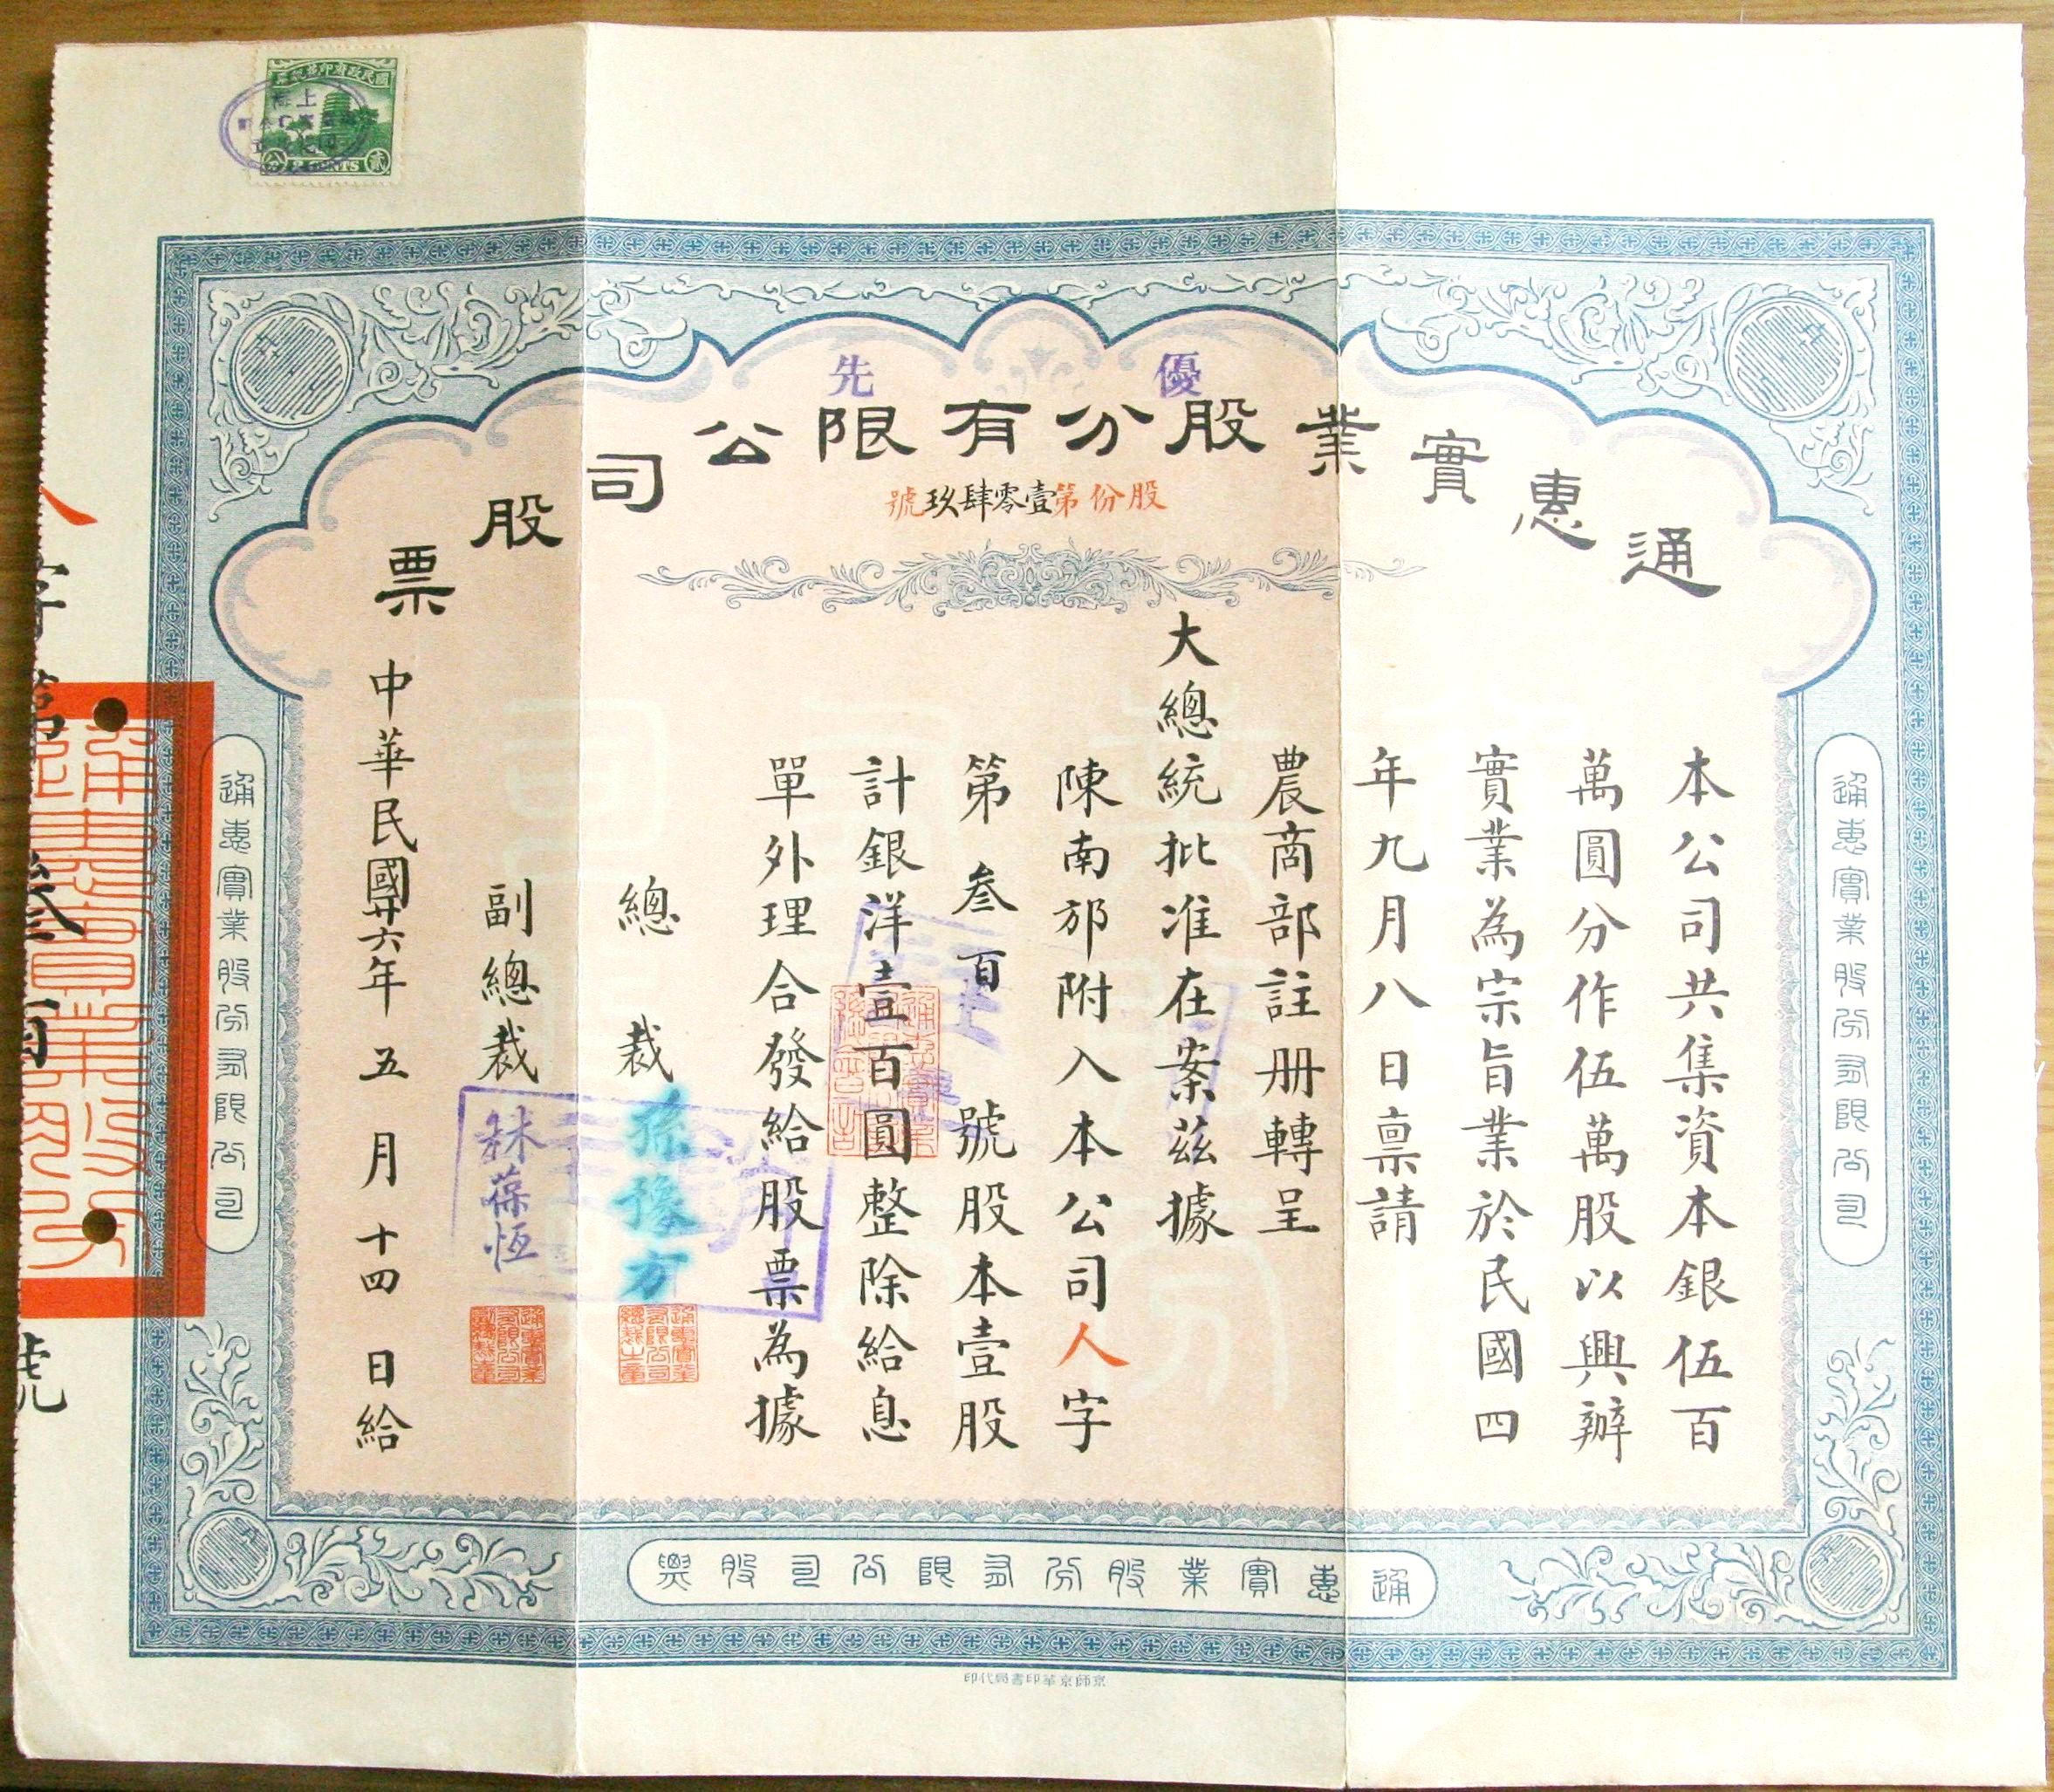 S0172, Tonghui Industries Co., Ltd, Stock of 1 Preferred Shares, China 1937